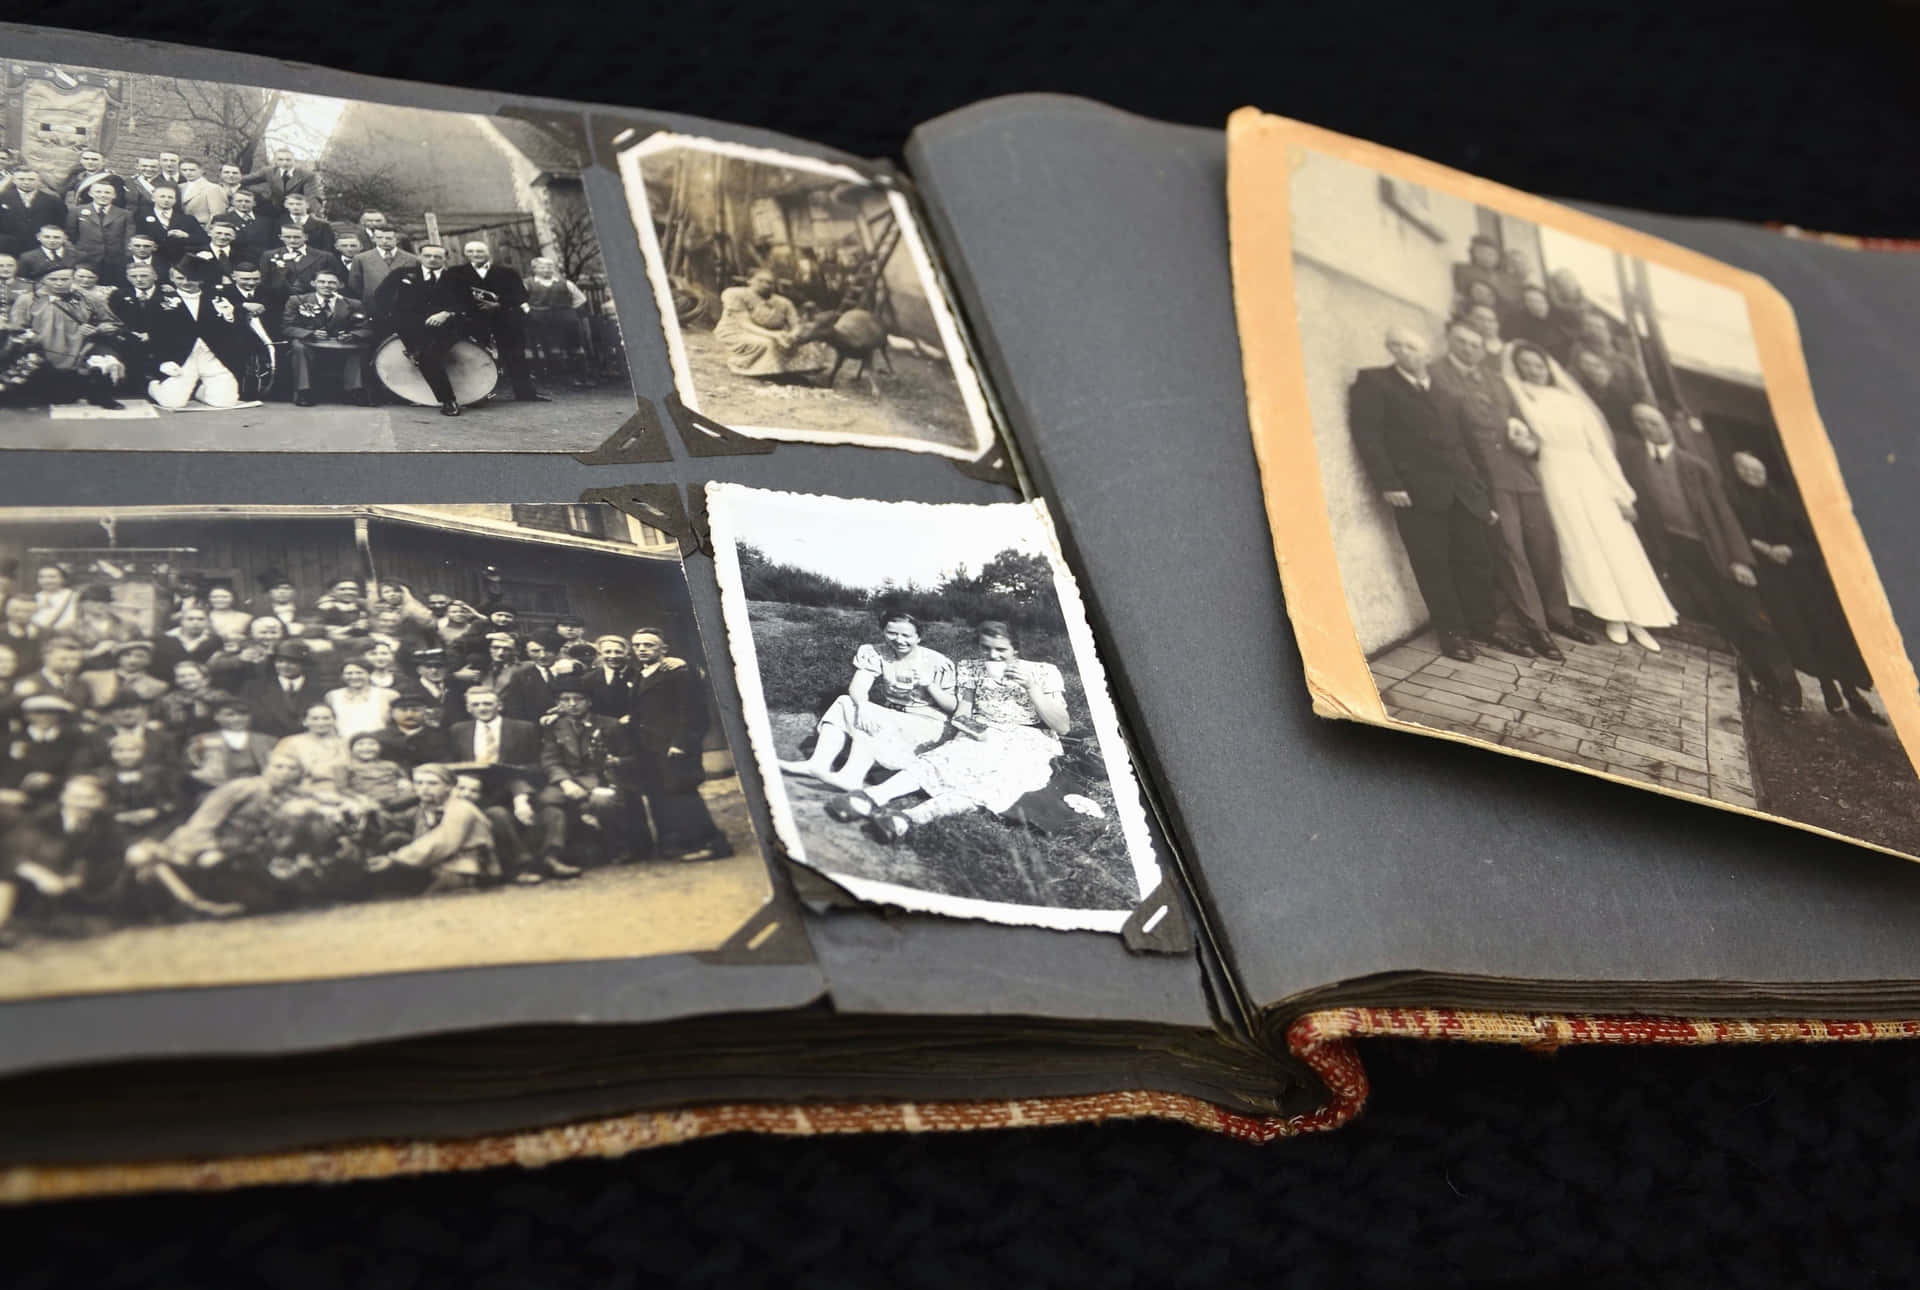 a book with old photos and a family photo